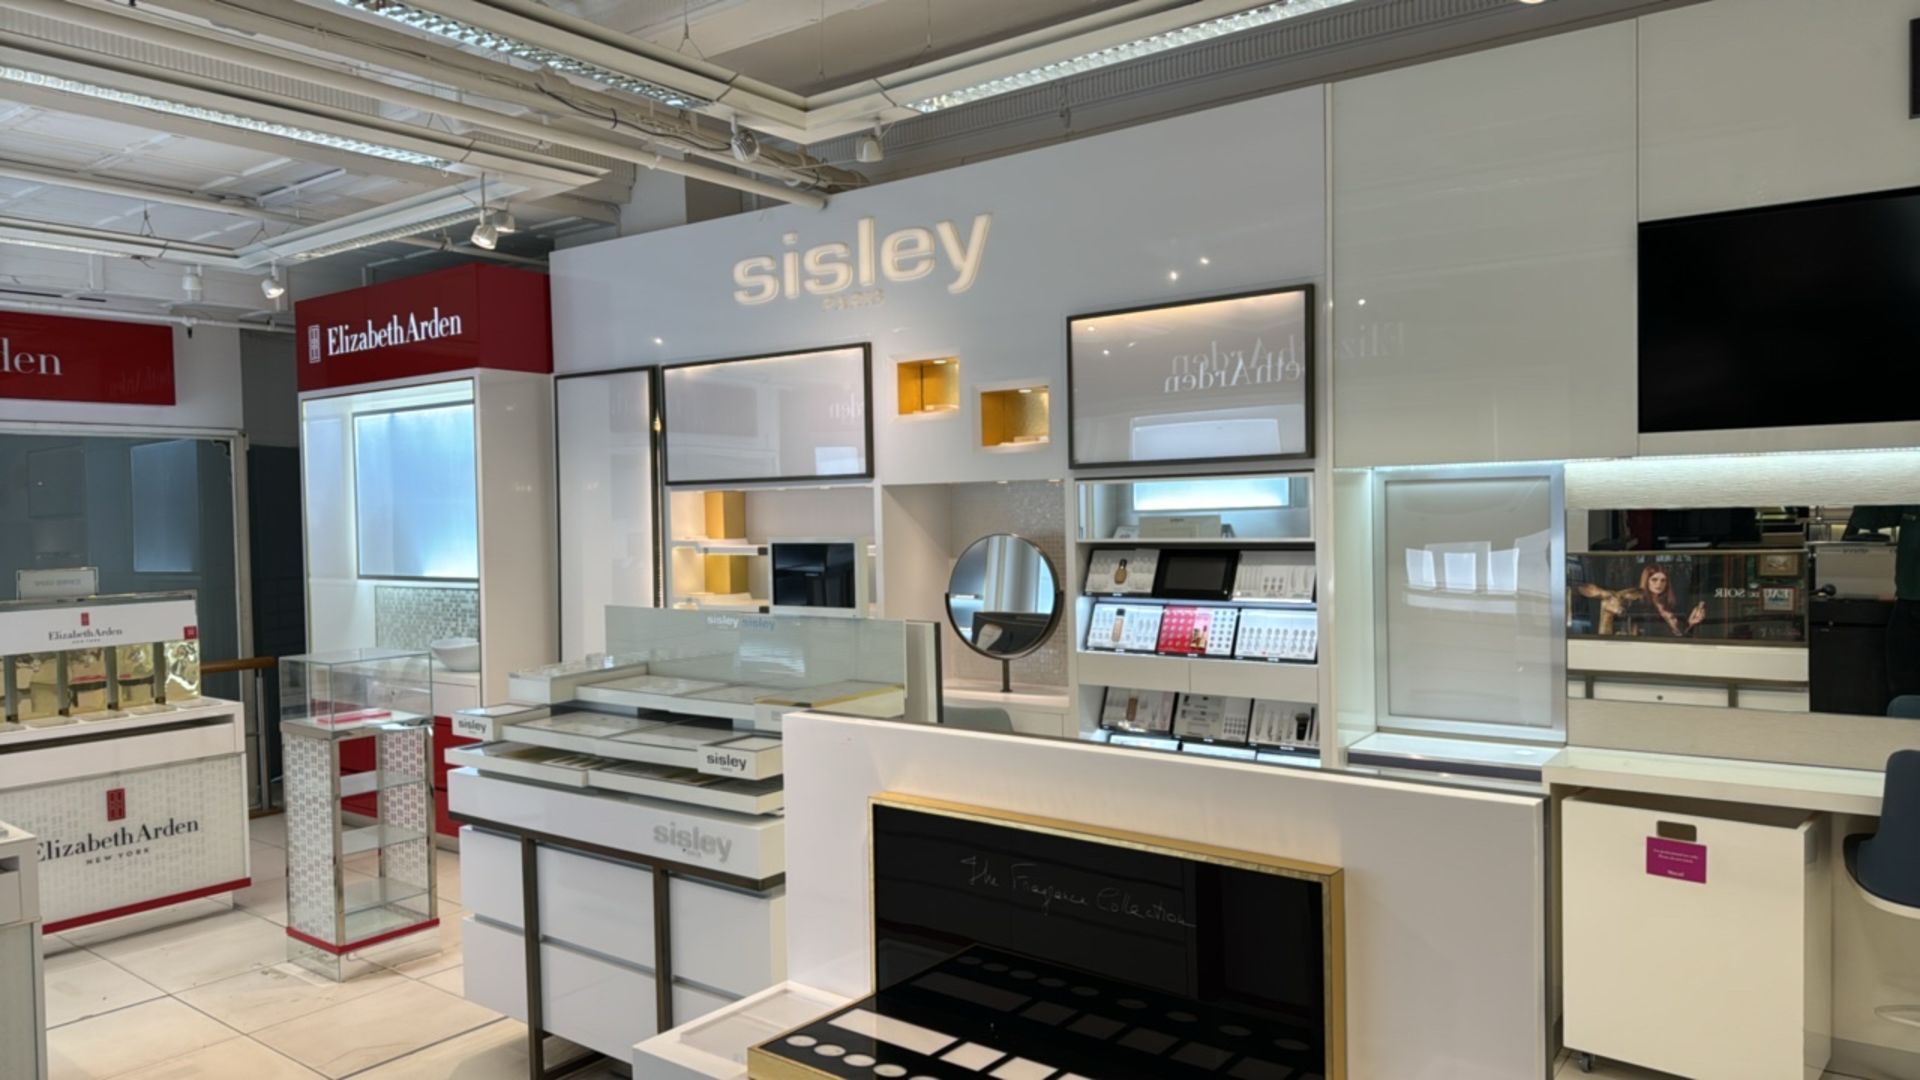 Contents of Sisley Concession Area